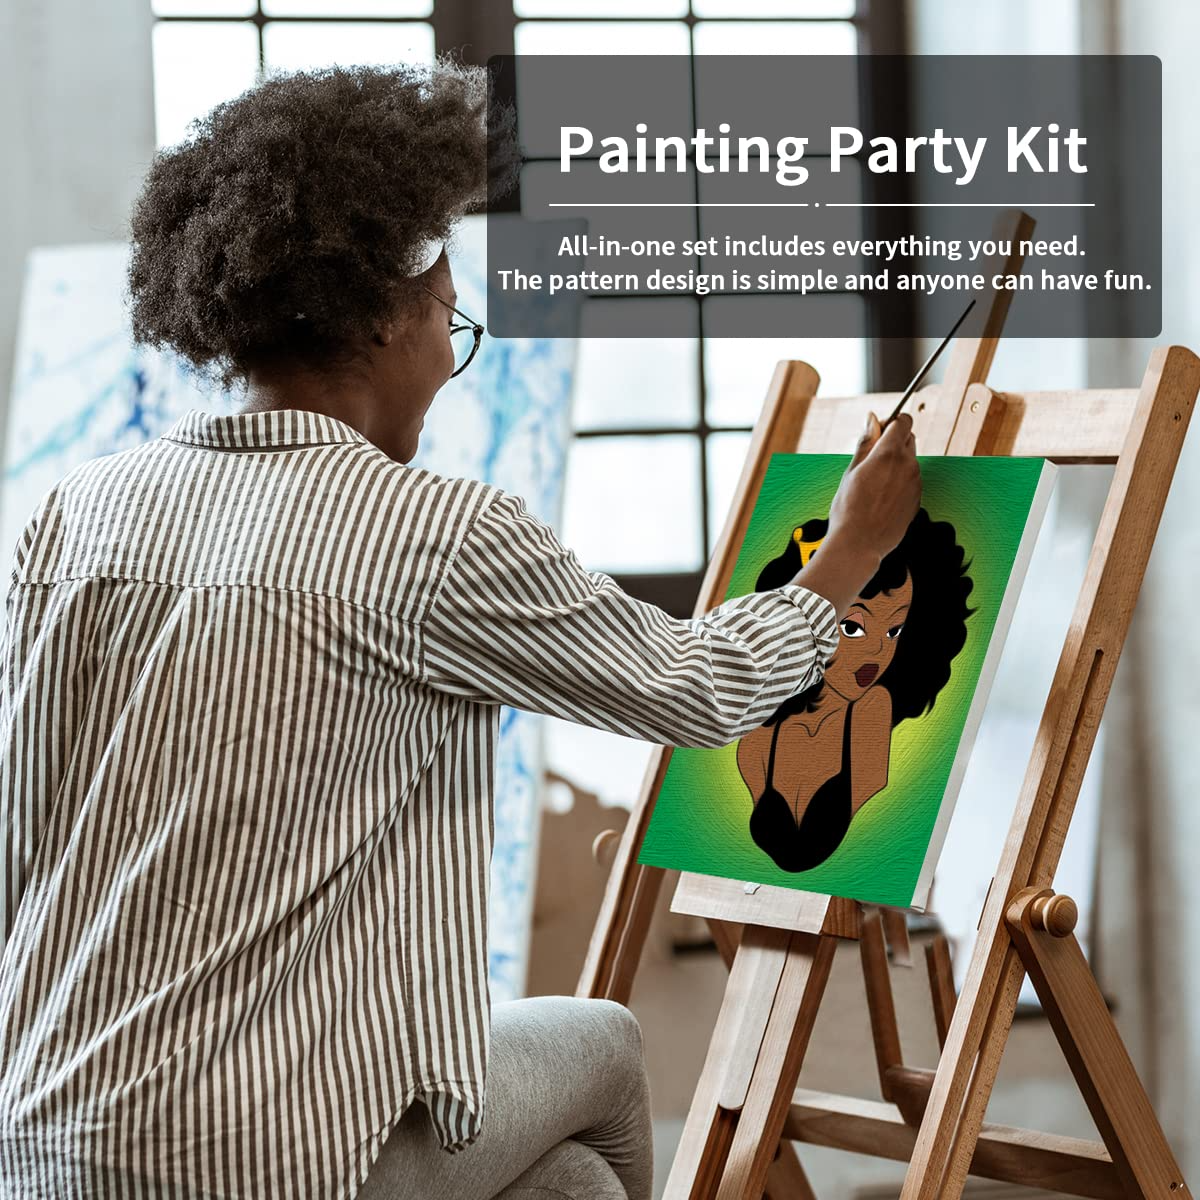 Canvas Painting, Afro Queen 2, 8x10 Pre Drawn Stretched Cotton Canvas, DIY Adult Sip and Paint Party Favor, BLM Party, Pre Drawn Canvas for Painting